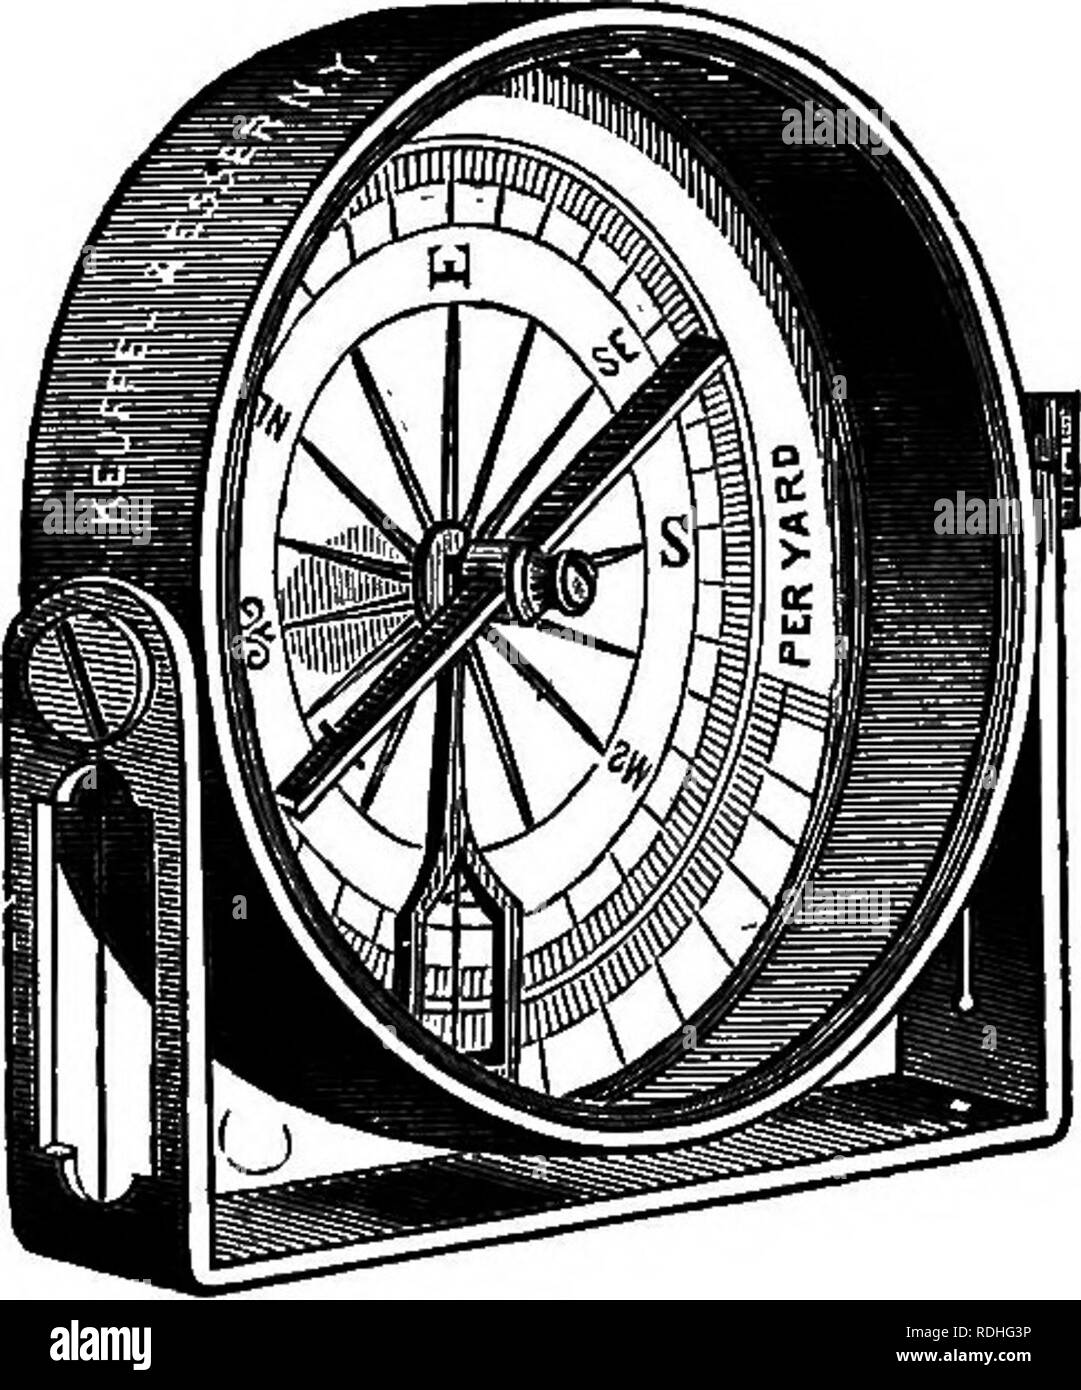 . Research methods in ecology. Plant ecology. Fig. 28. Combined clinometer and compass. 123. The trechometer. For measuring the effect of slope upon run-off, a simple instrument called the trechometer (rpi-xu), to run off) has been devised. This consists merely of a metal tank, 3 x 4 x 12 inches, hold- ing 144 square inches of water, with an opening J4 x 12 inches at the base in front, closed by a tight-fitting slide. Three metal strips, 2 x 12 inches, are fastened to the front of the tank in such a way as to enclose a square foot of soil into which the strips penetrate an inch. In the front s Stock Photo